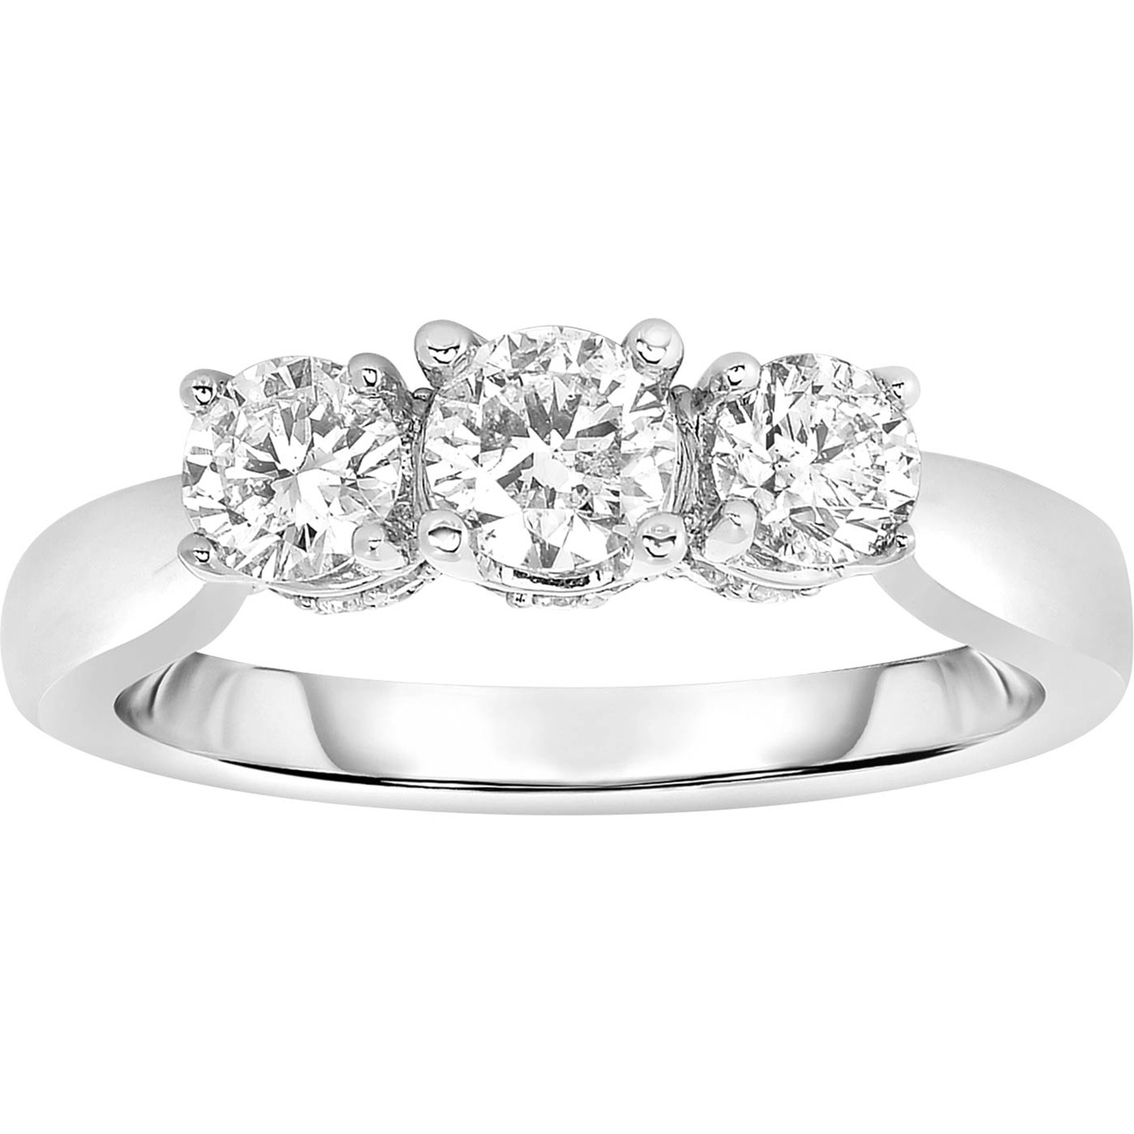 18KW Gold 1 1/2 ct. TDW 3 Stone Diamond Ring with Diamond Accents